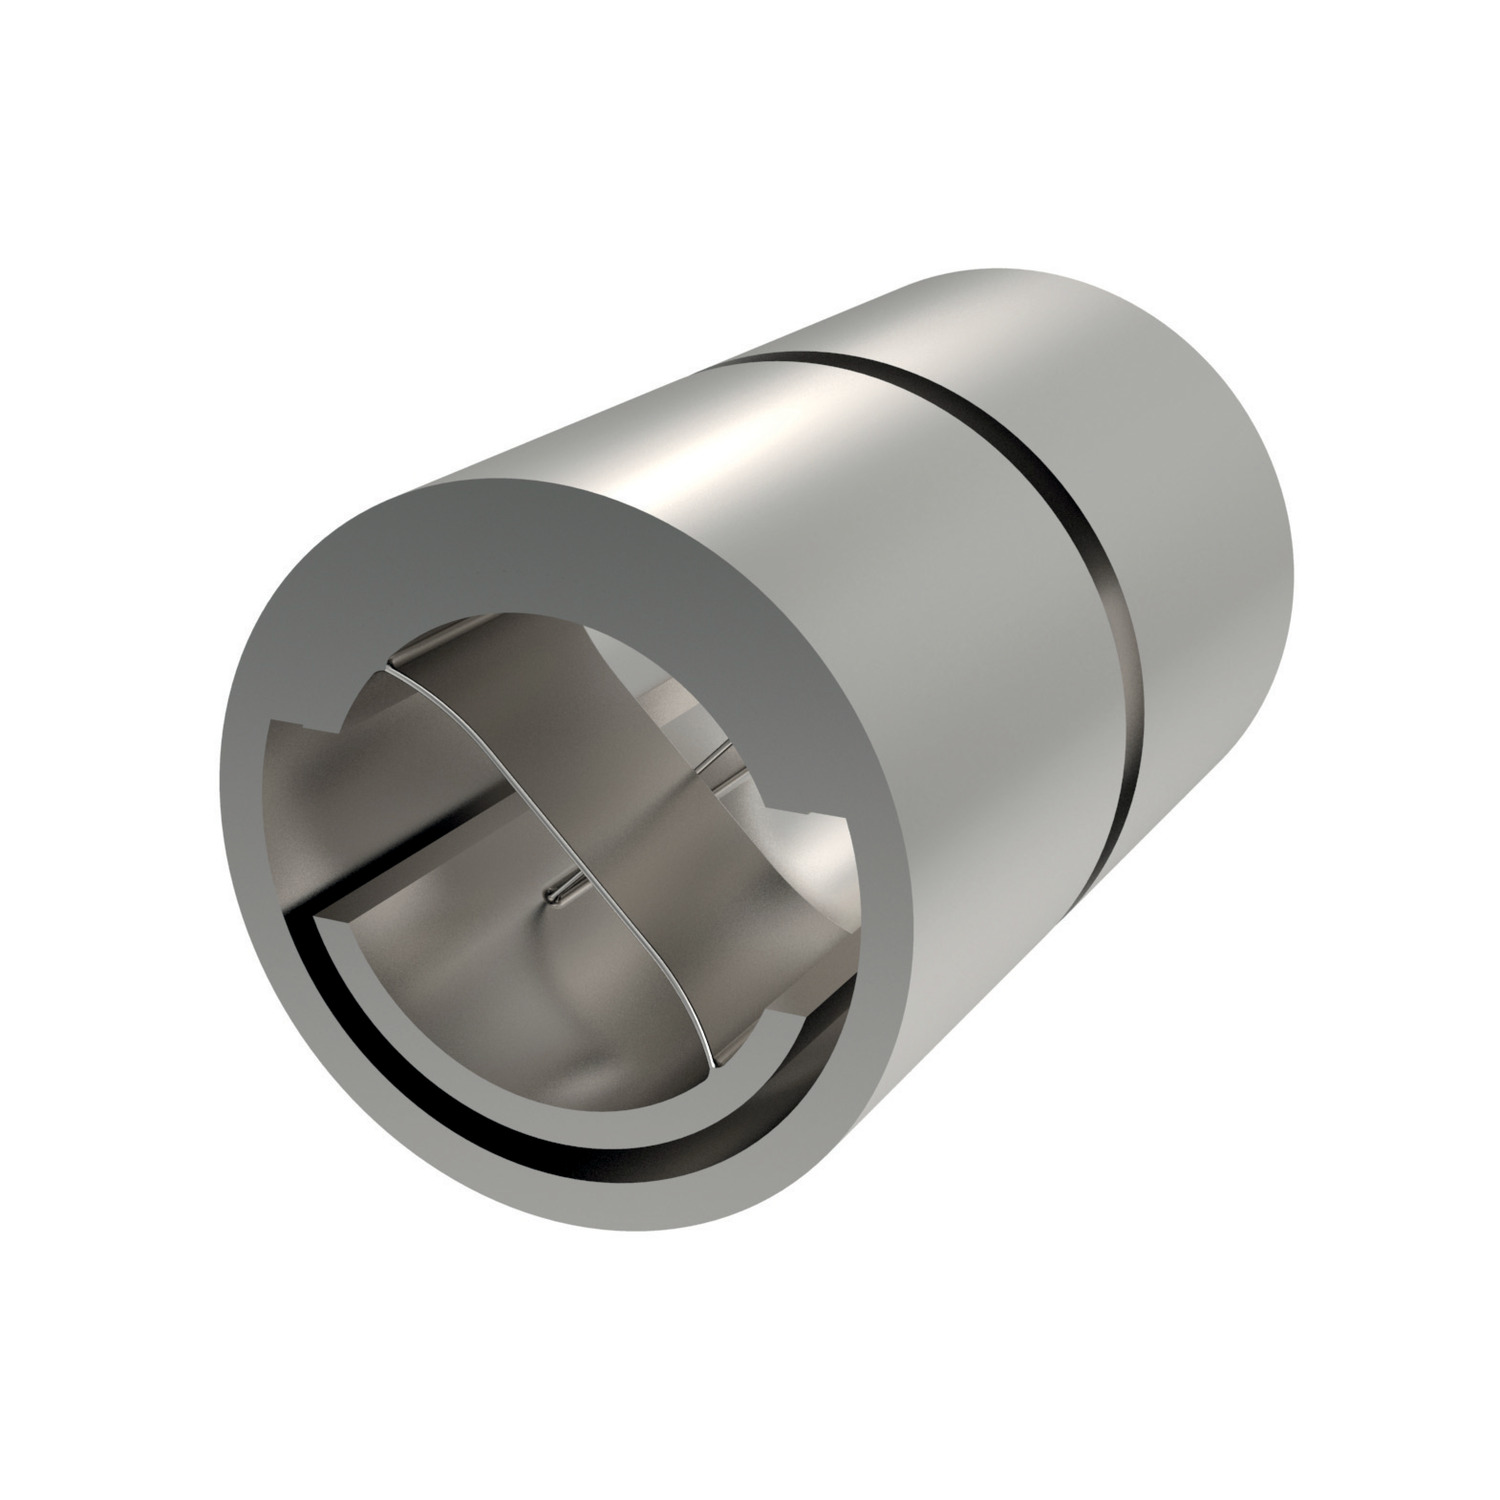 Flexure Pivot Bearings The body of the flex pivot bearing is made from stainless steel, the spring is made from stainless steel with the core being made from bronze alloy.